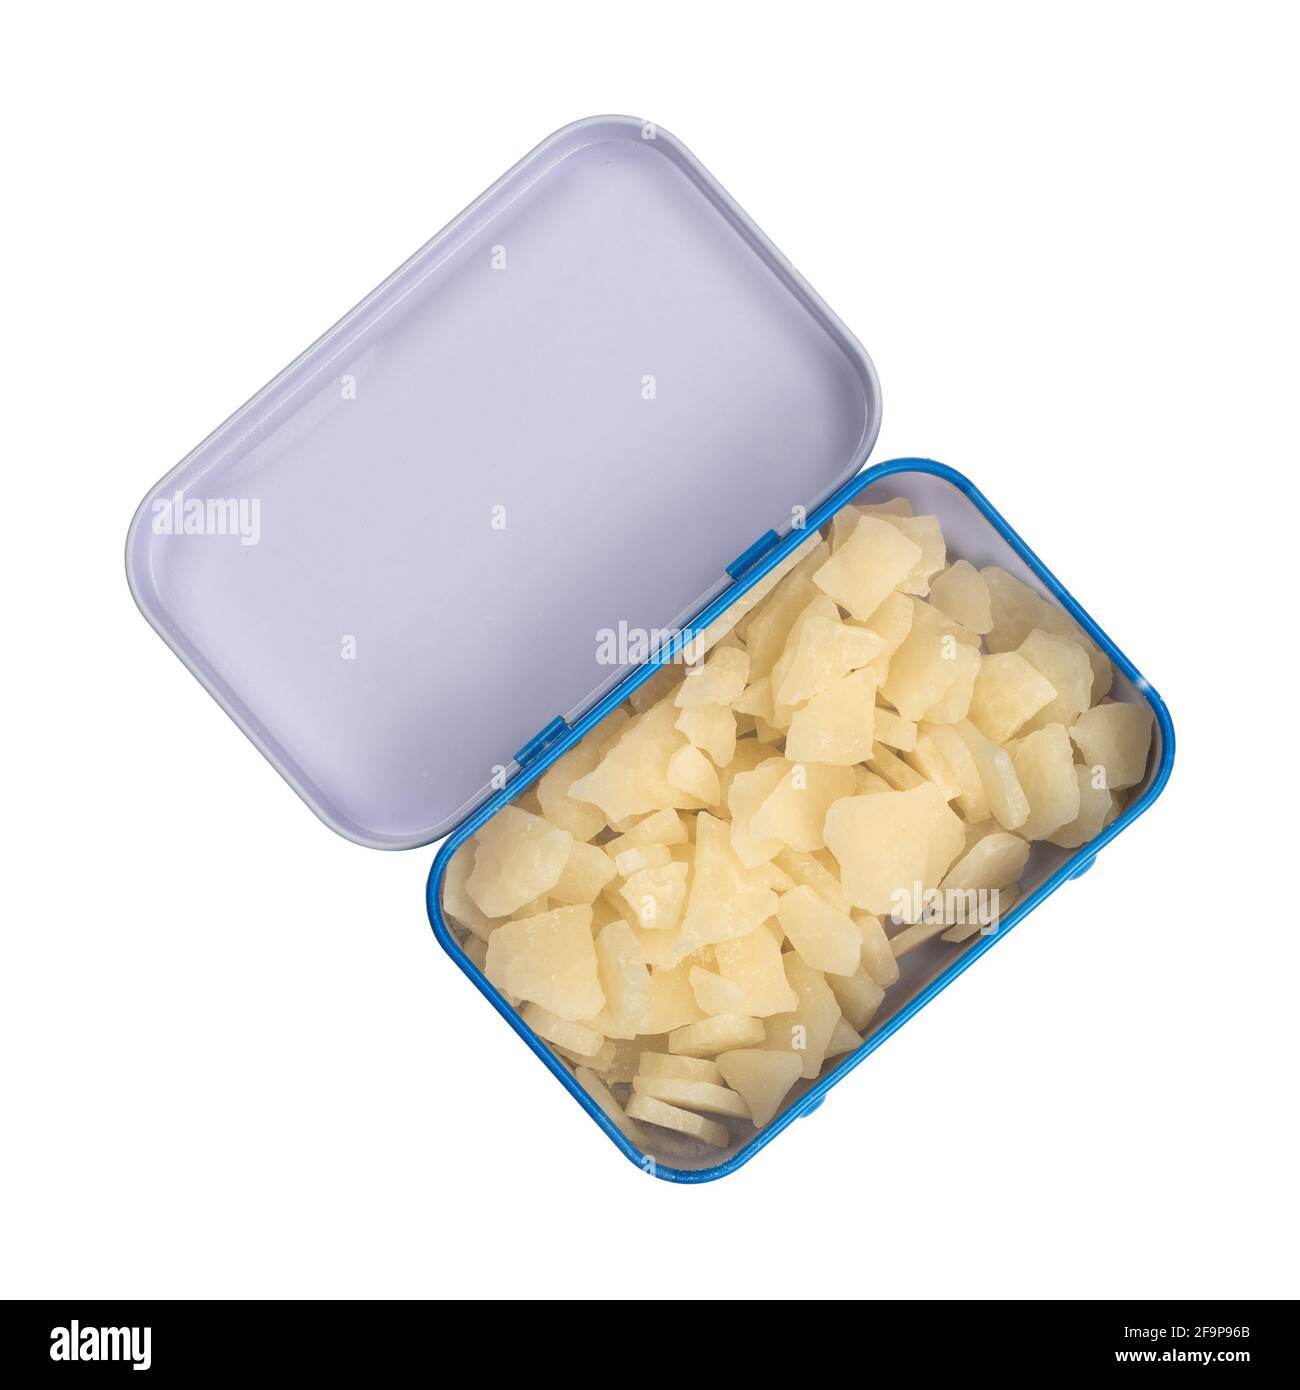 Top view of a small open tin filled with ice chips flavored candy isolated on a white background. Stock Photo